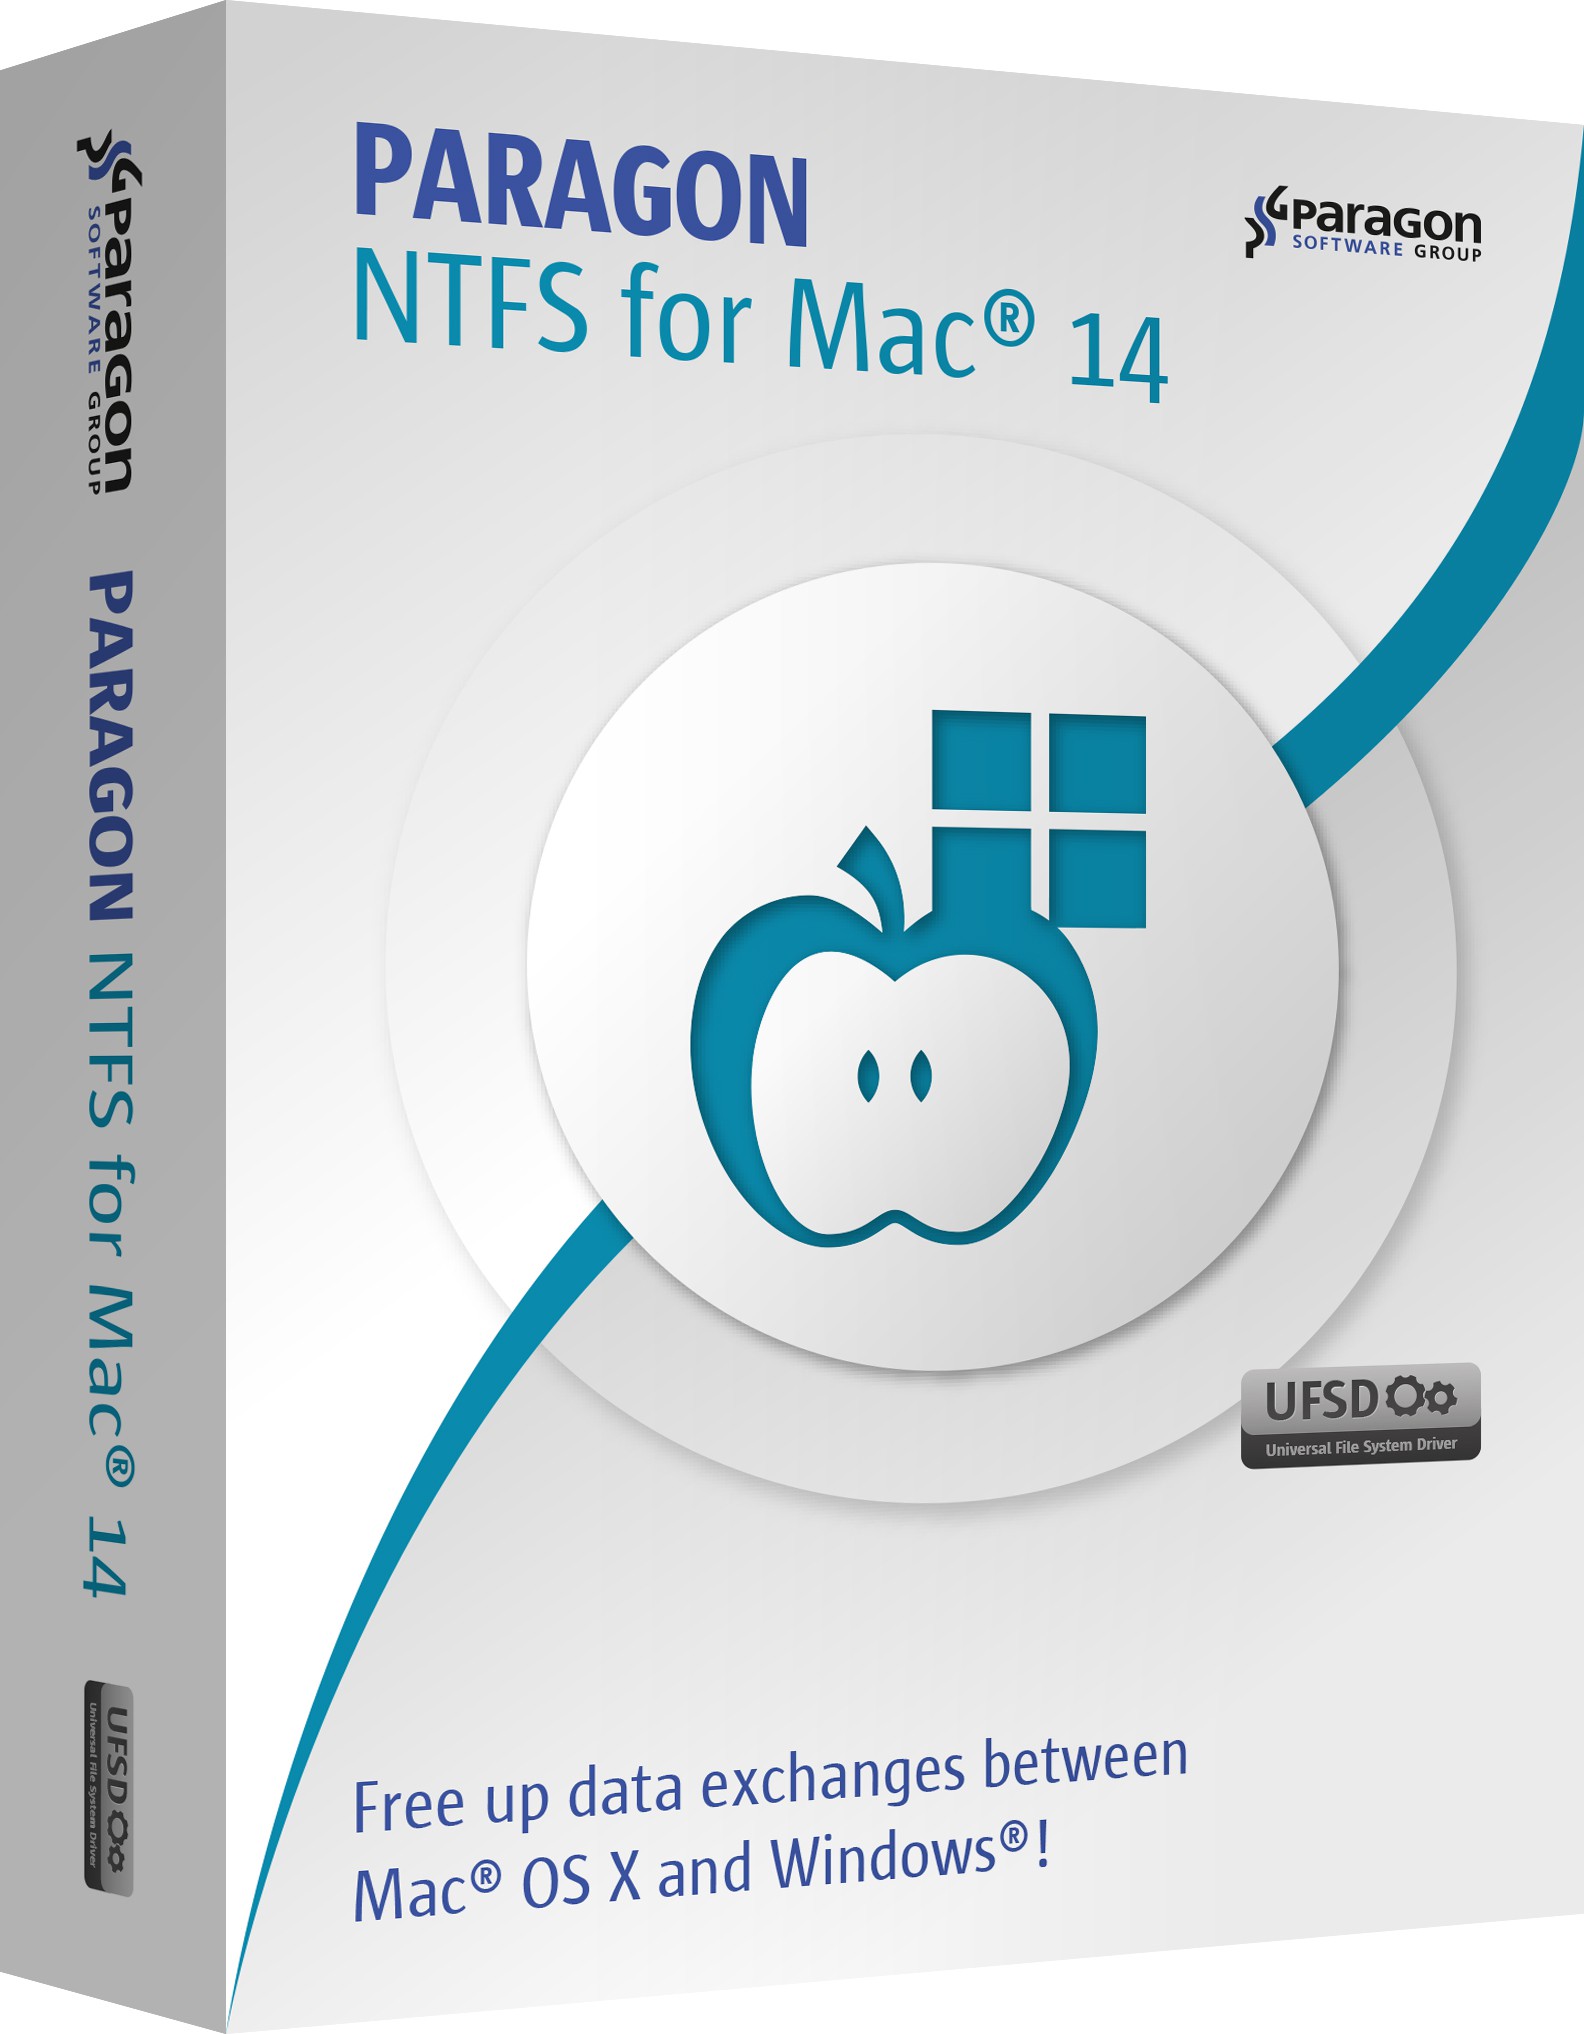 NTFS for Mac 10.1.78 download